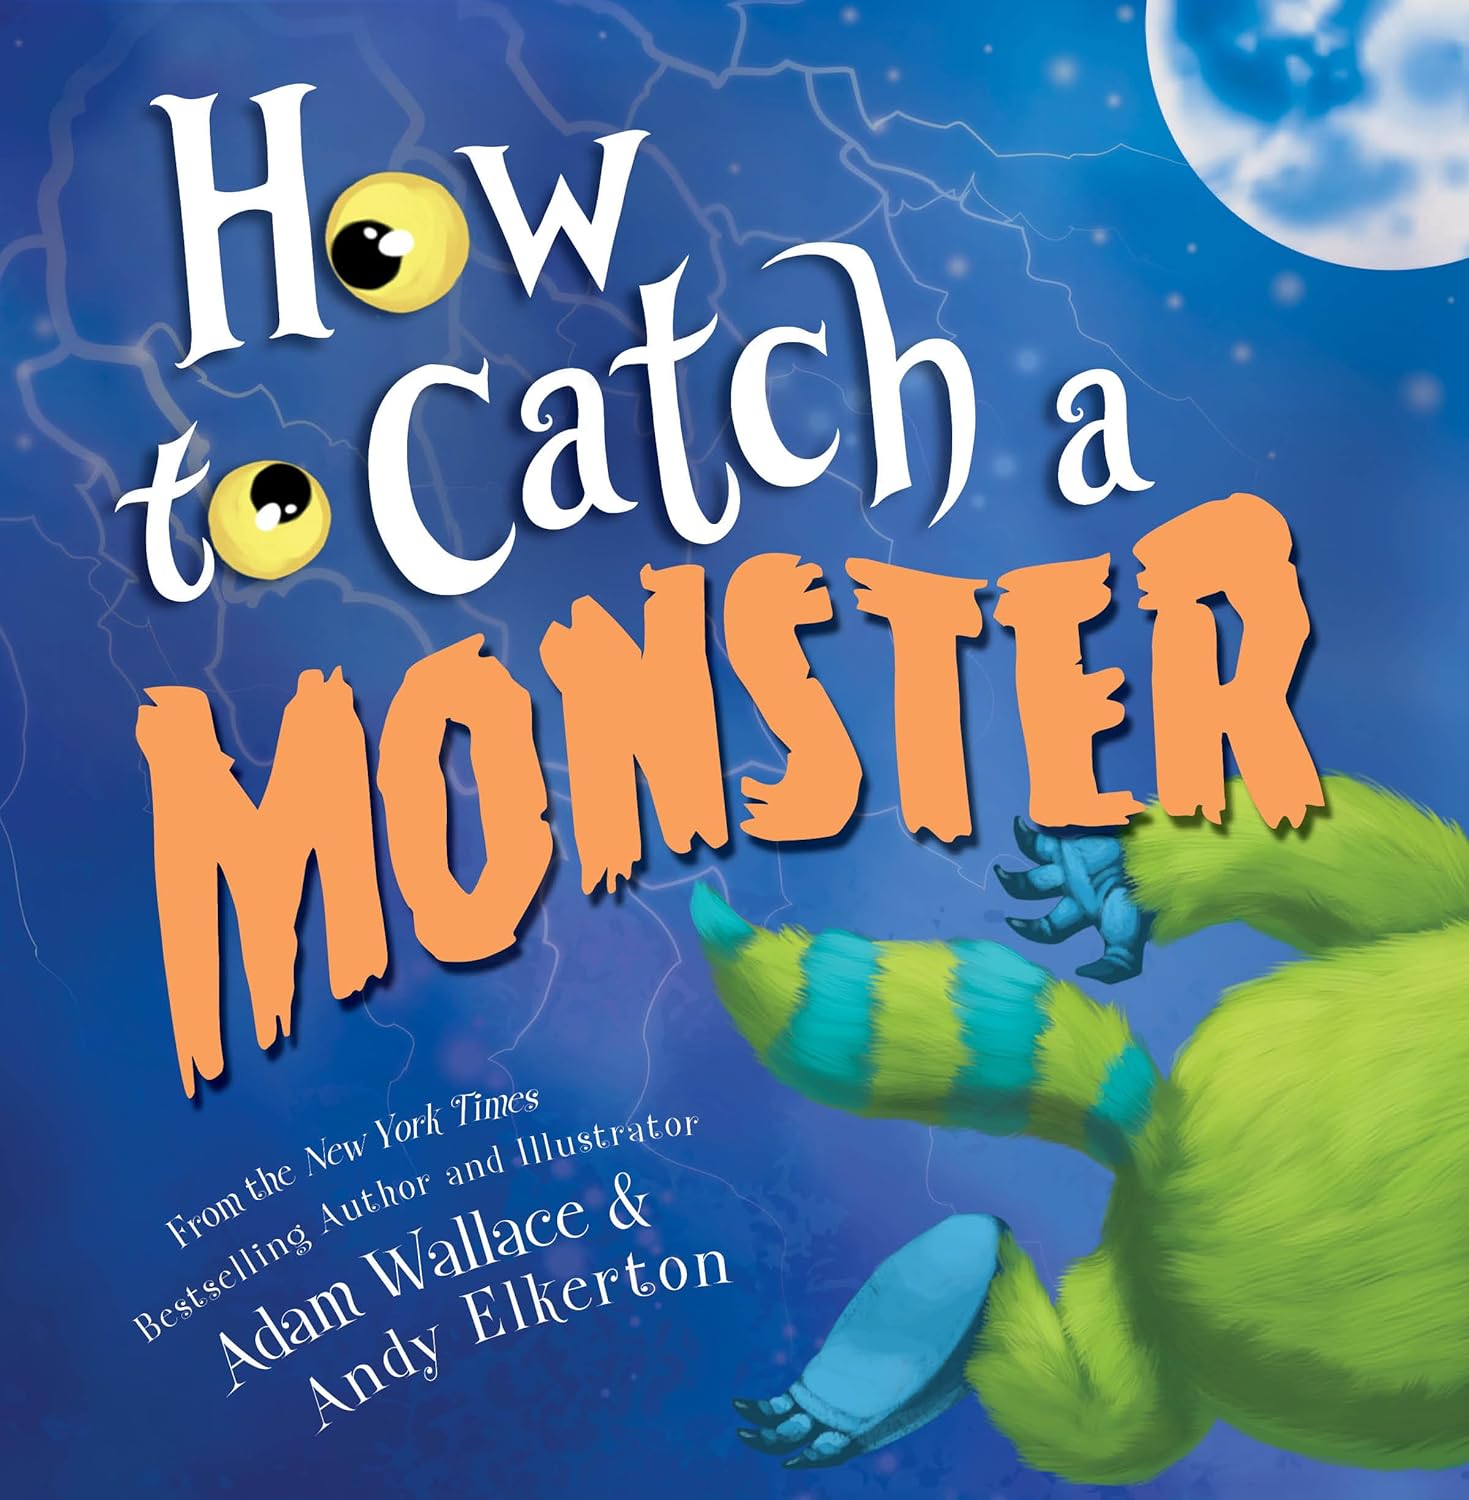 How to Catch a Monster (Hardcover)